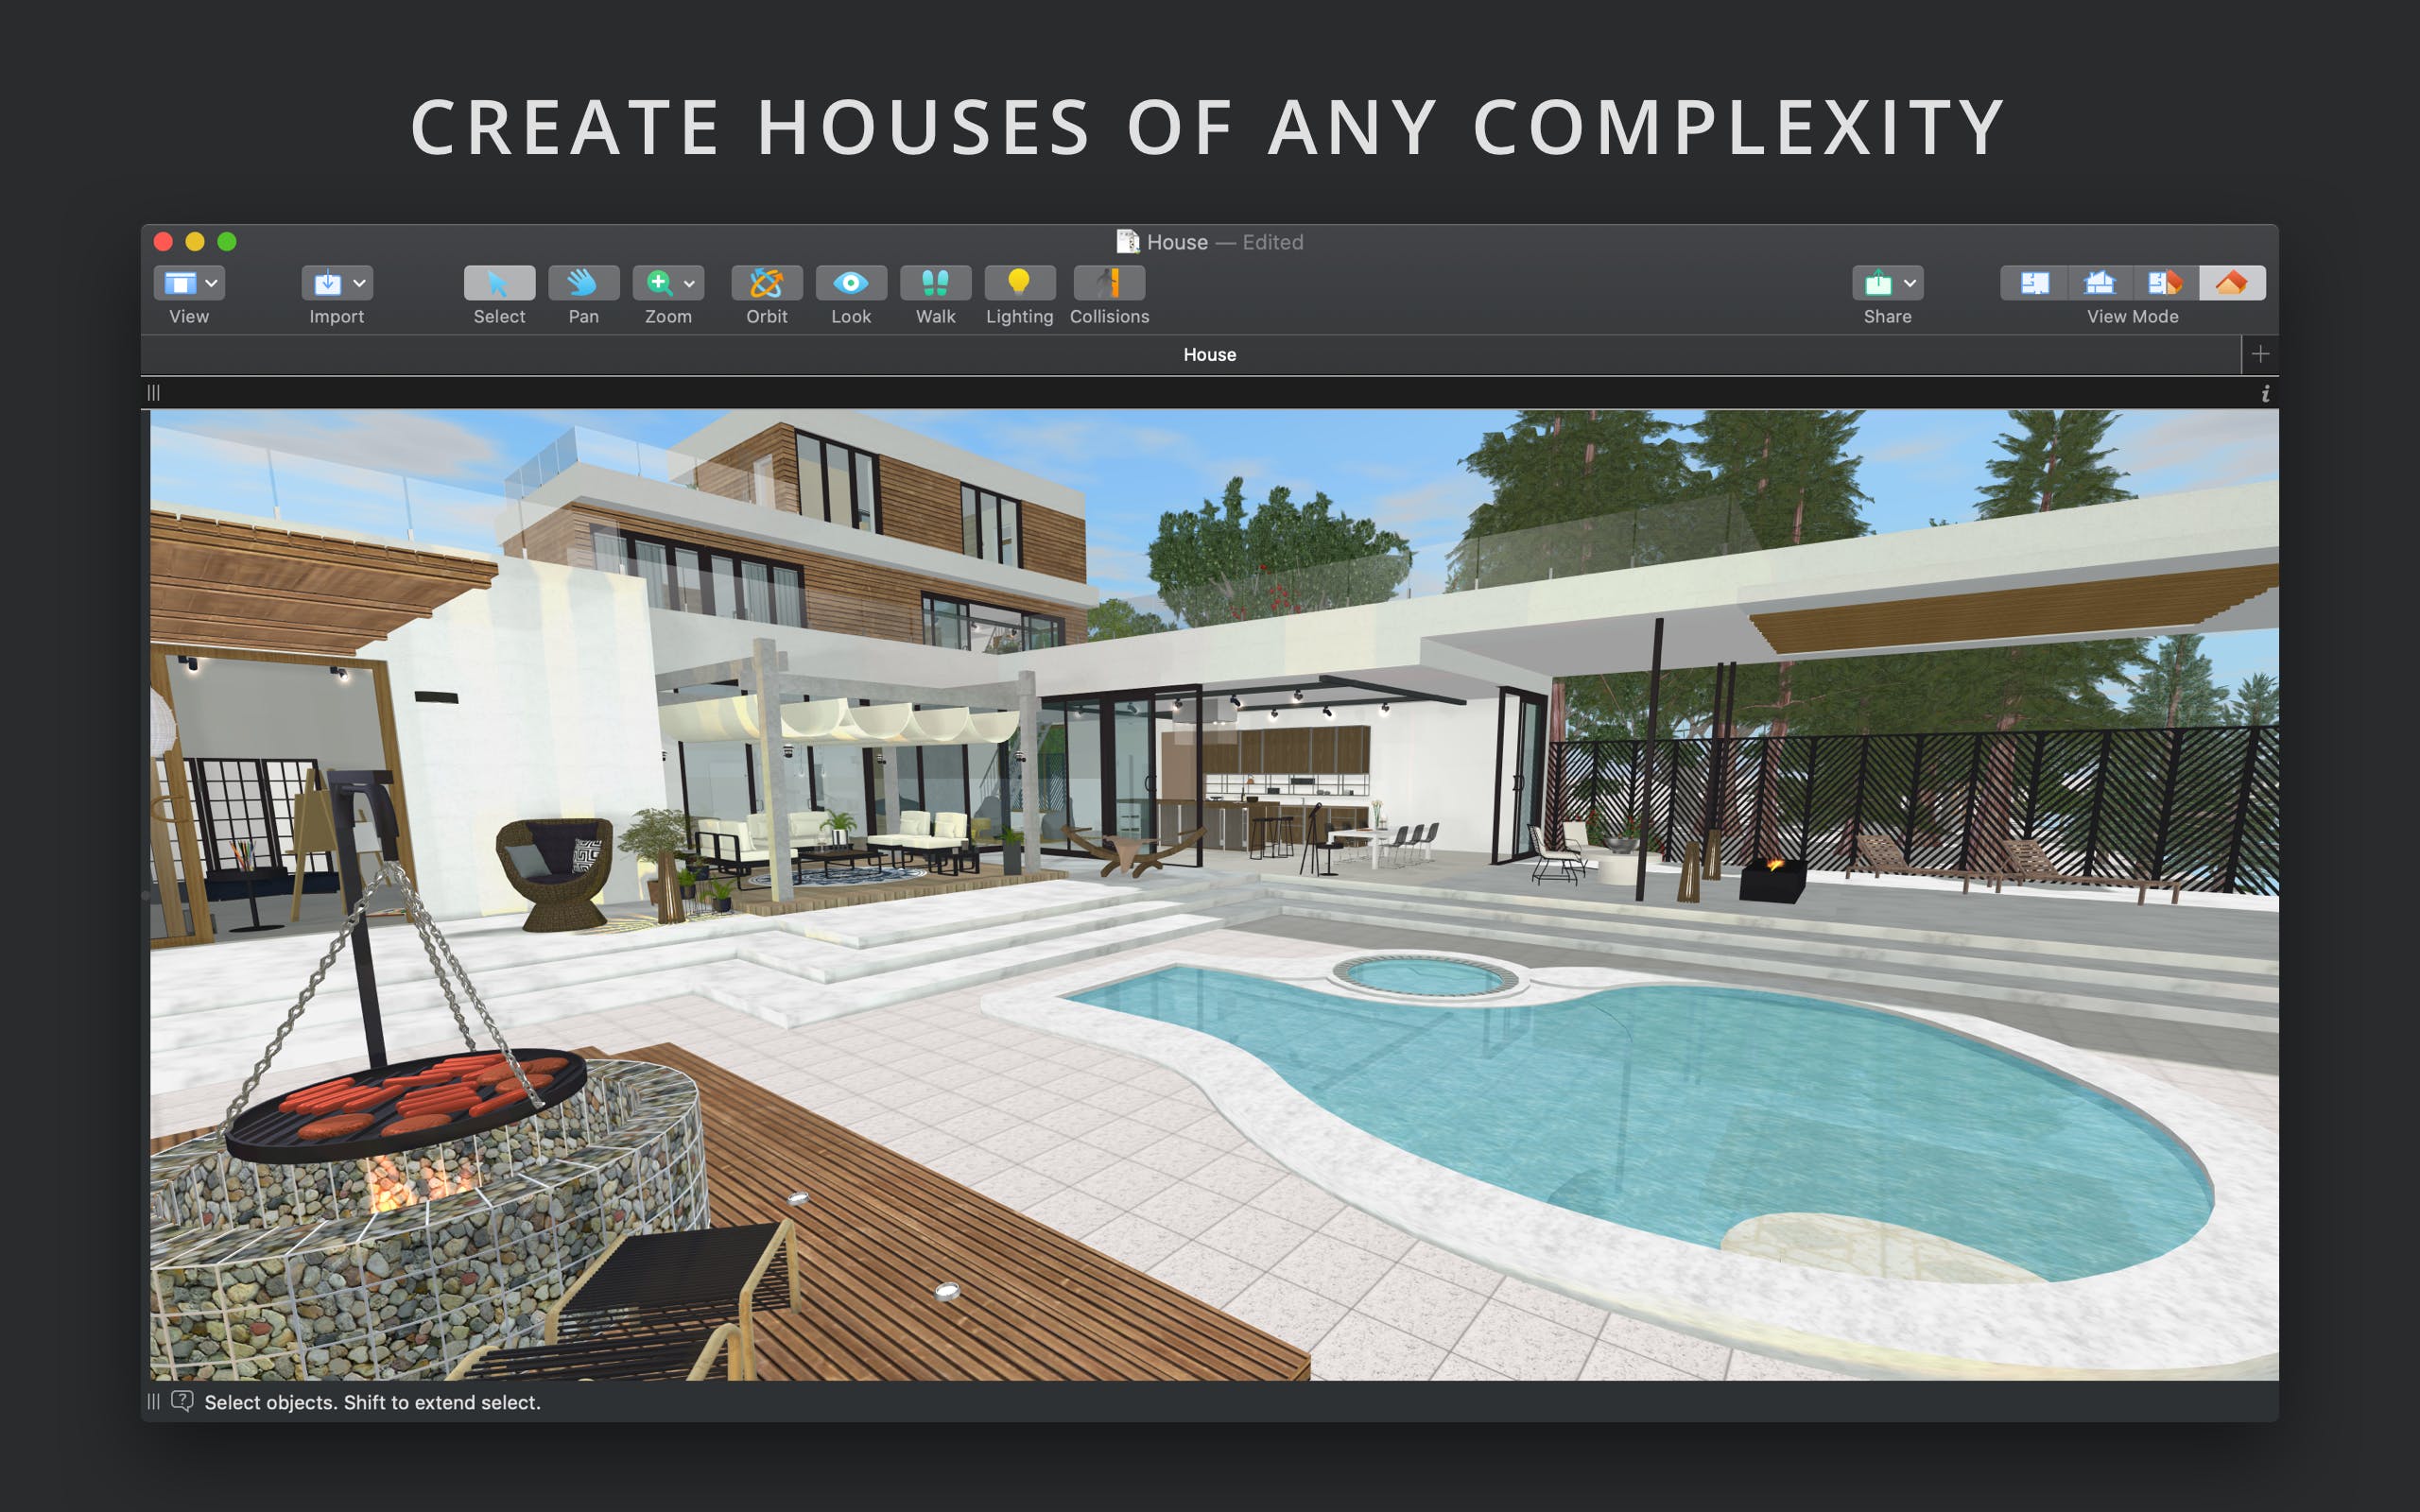 Live Home 3D 4.0 - Design house and landscape of any complexity